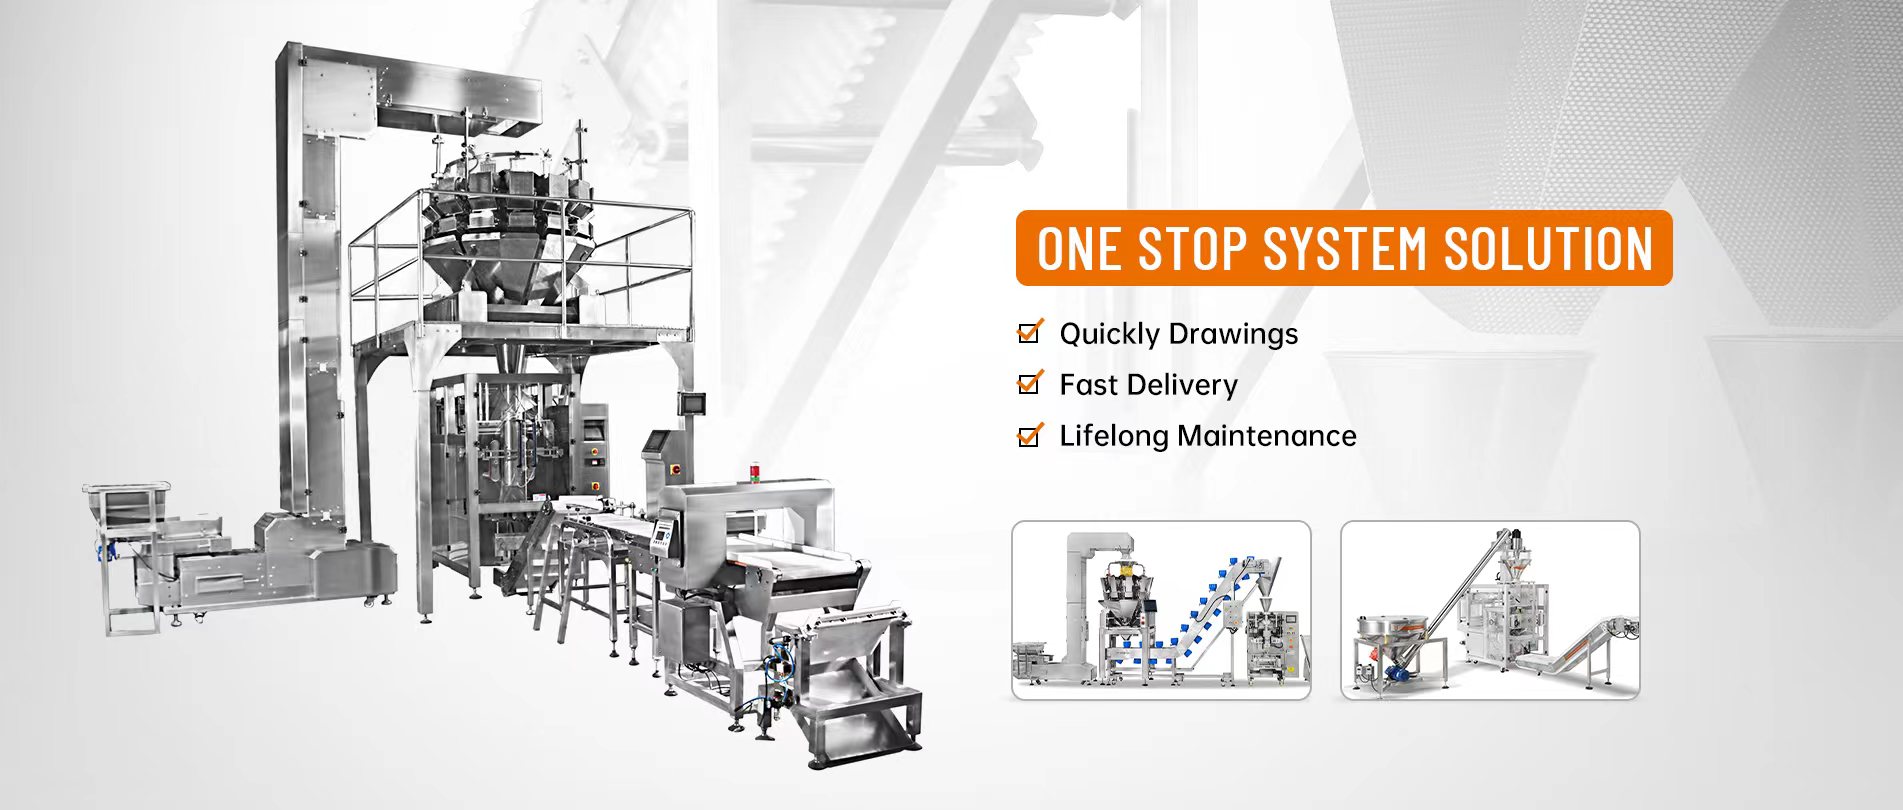 Automatic Weighing Packaging Machine